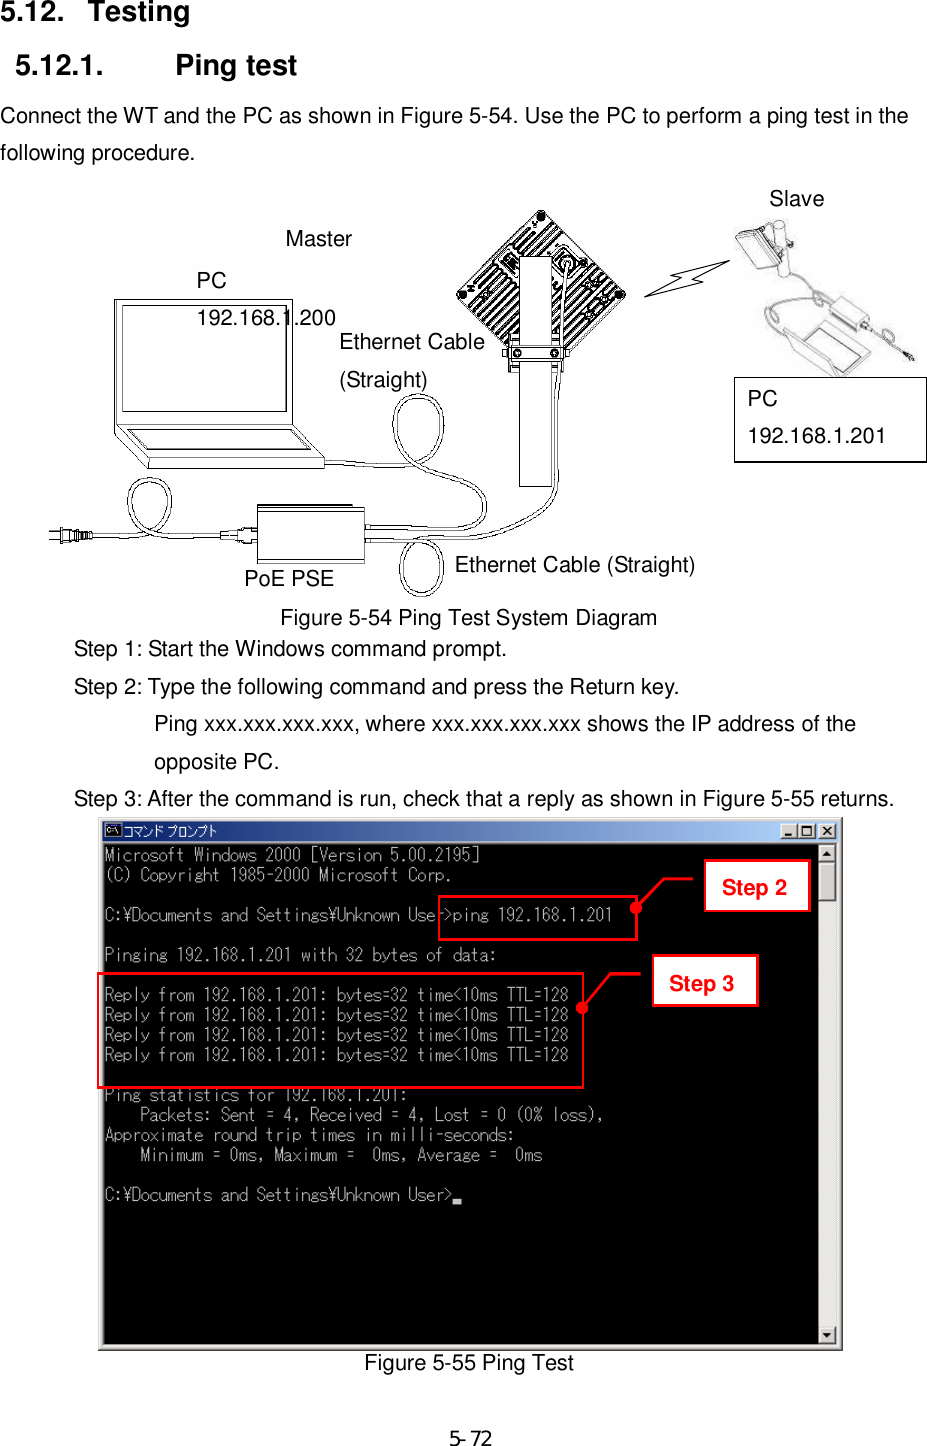     5-725.12.  Testing 5.12.1.  Ping test Connect the WT and the PC as shown in Figure 5-54. Use the PC to perform a ping test in the following procedure.  Figure 5-54 Ping Test System Diagram Step 1: Start the Windows command prompt. Step 2: Type the following command and press the Return key. Ping xxx.xxx.xxx.xxx, where xxx.xxx.xxx.xxx shows the IP address of the opposite PC. Step 3: After the command is run, check that a reply as shown in Figure 5-55 returns.  Figure 5-55 Ping Test Master PC 192.168.1.200 Ethernet Cable  (Straight)  PoE PSE Ethernet Cable (Straight) Slave Step 2 Step 3 PC 192.168.1.201 